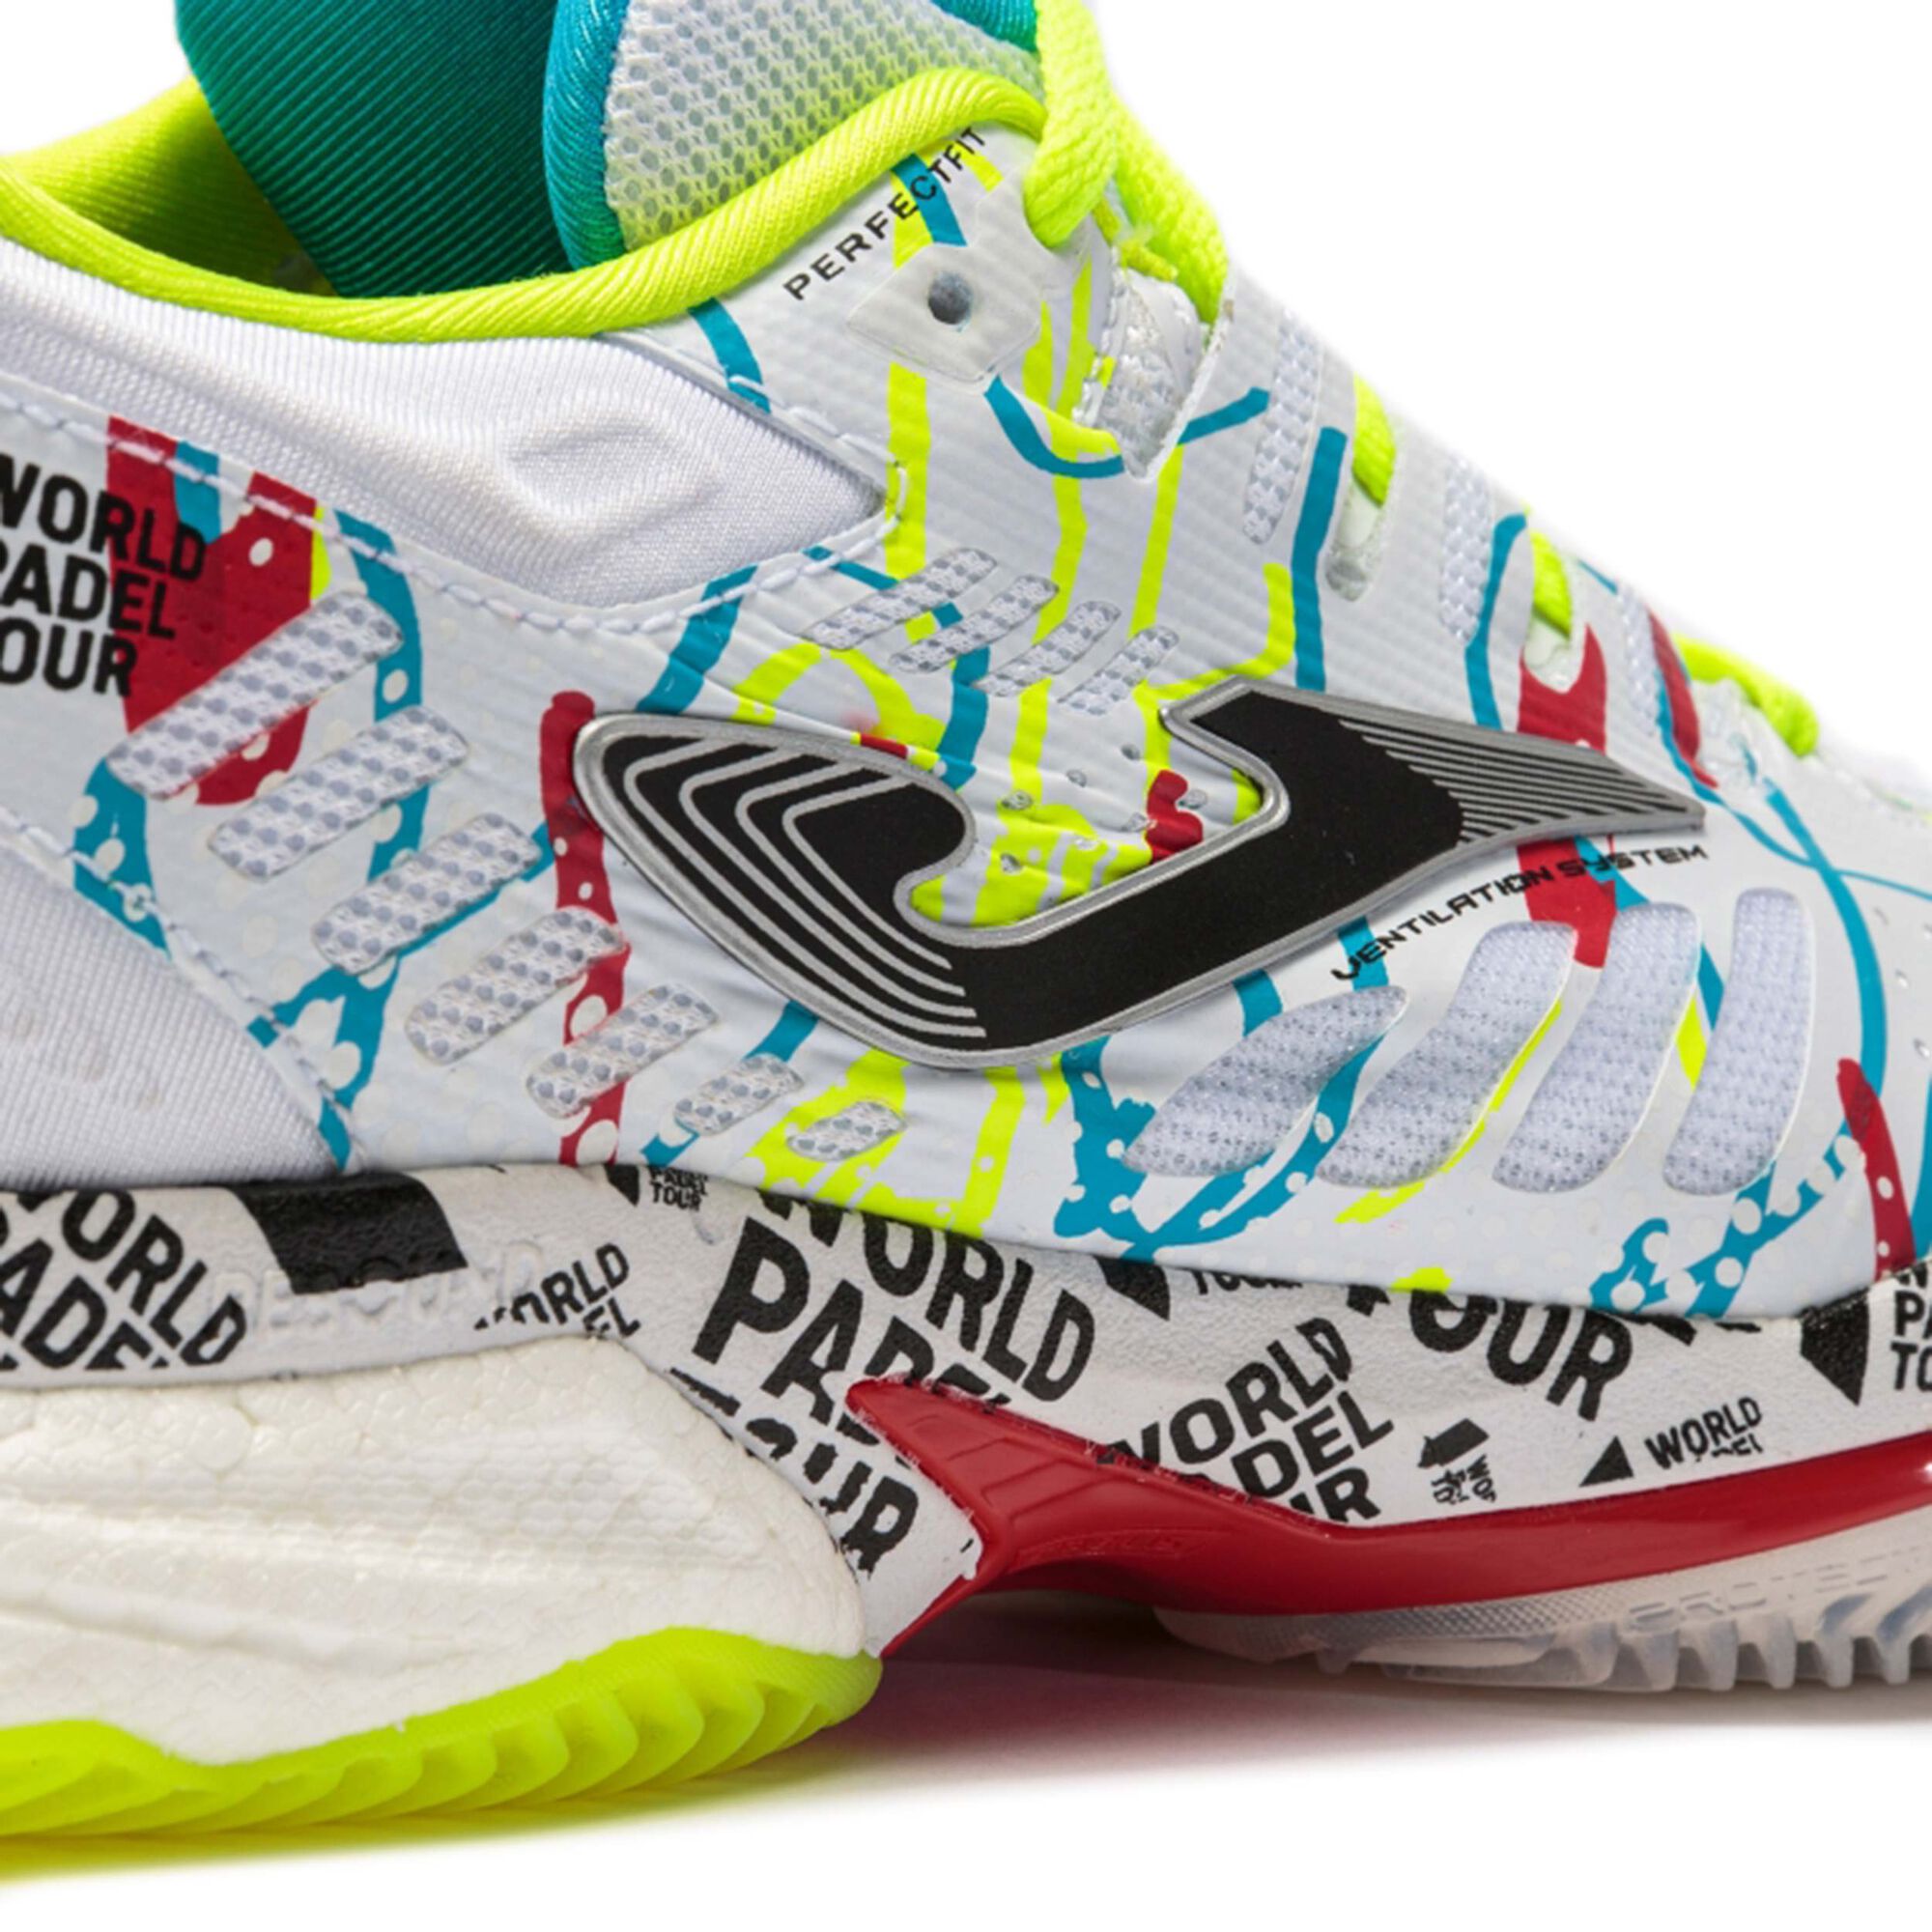 Joma launches a limited edition of the official World Padel Tour shoe - Joma  World